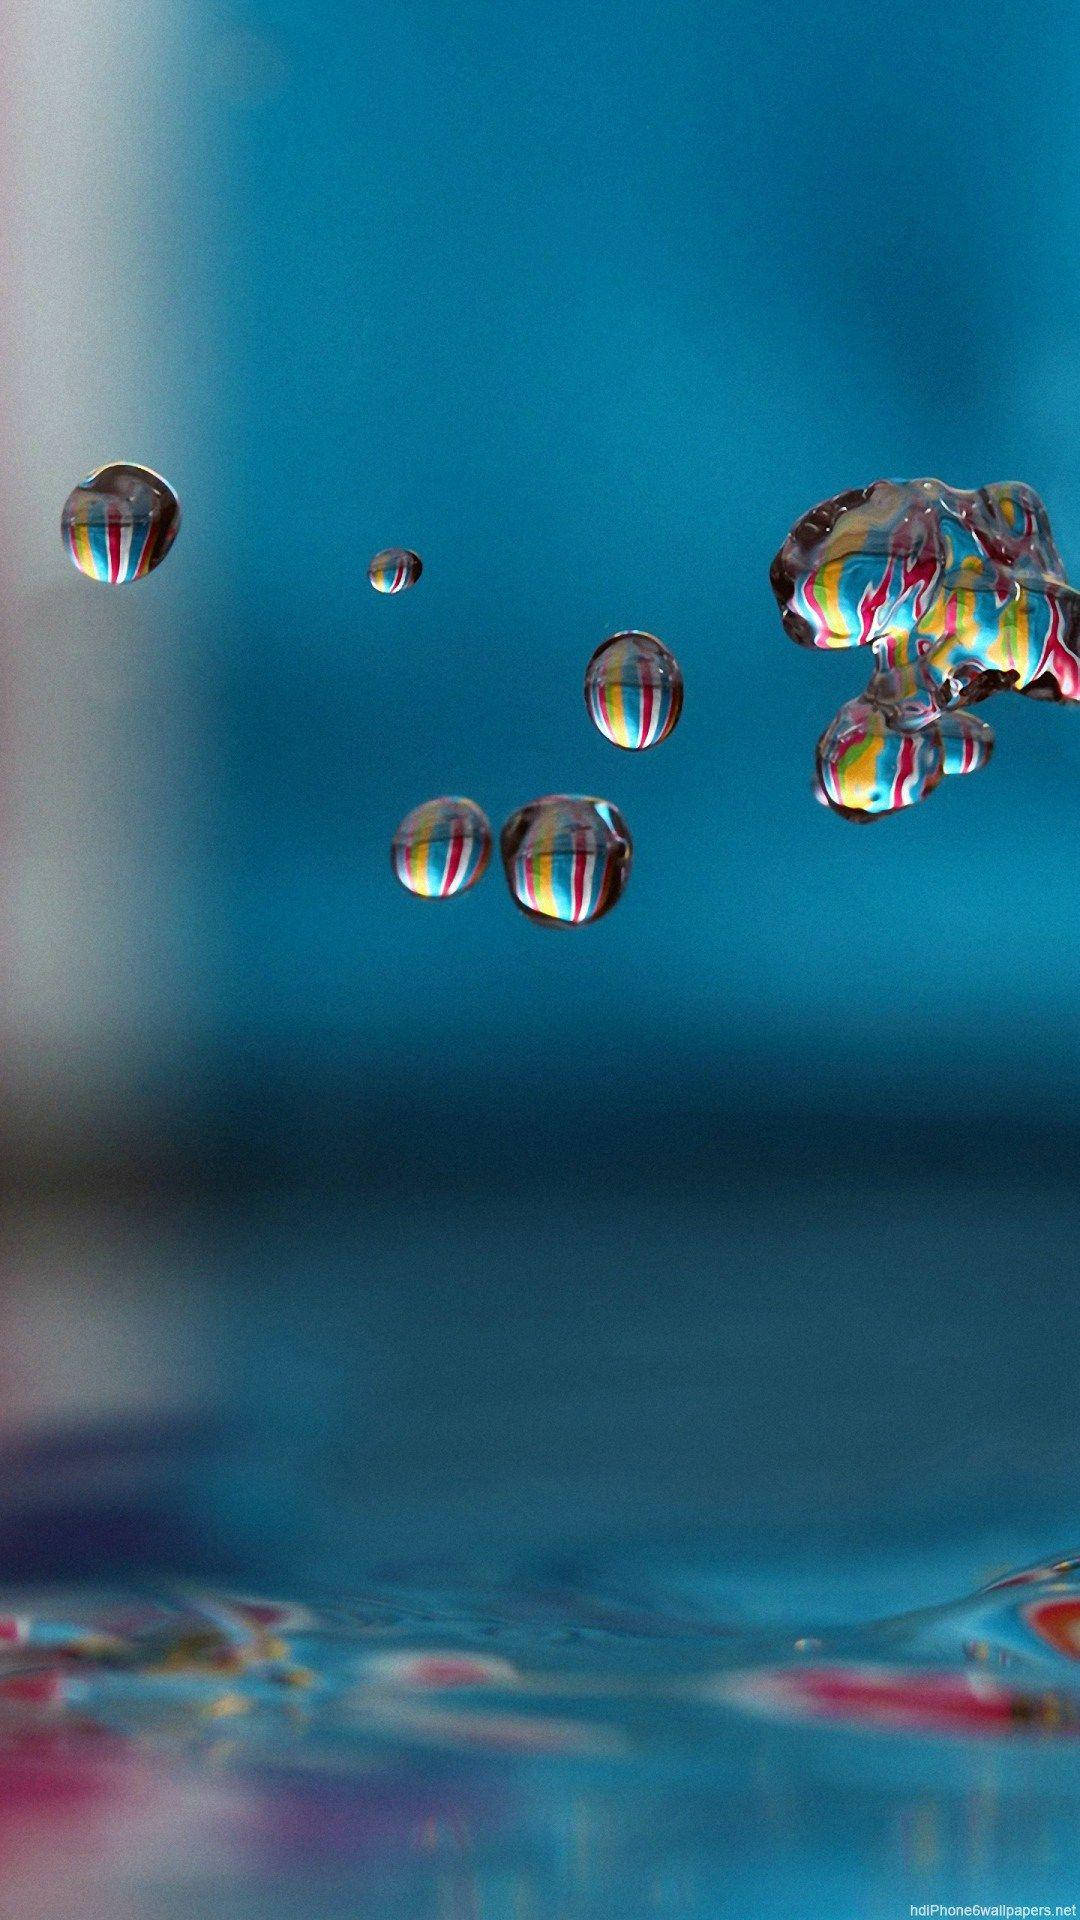 Floating Water Droplets Iphone 8 Live Background